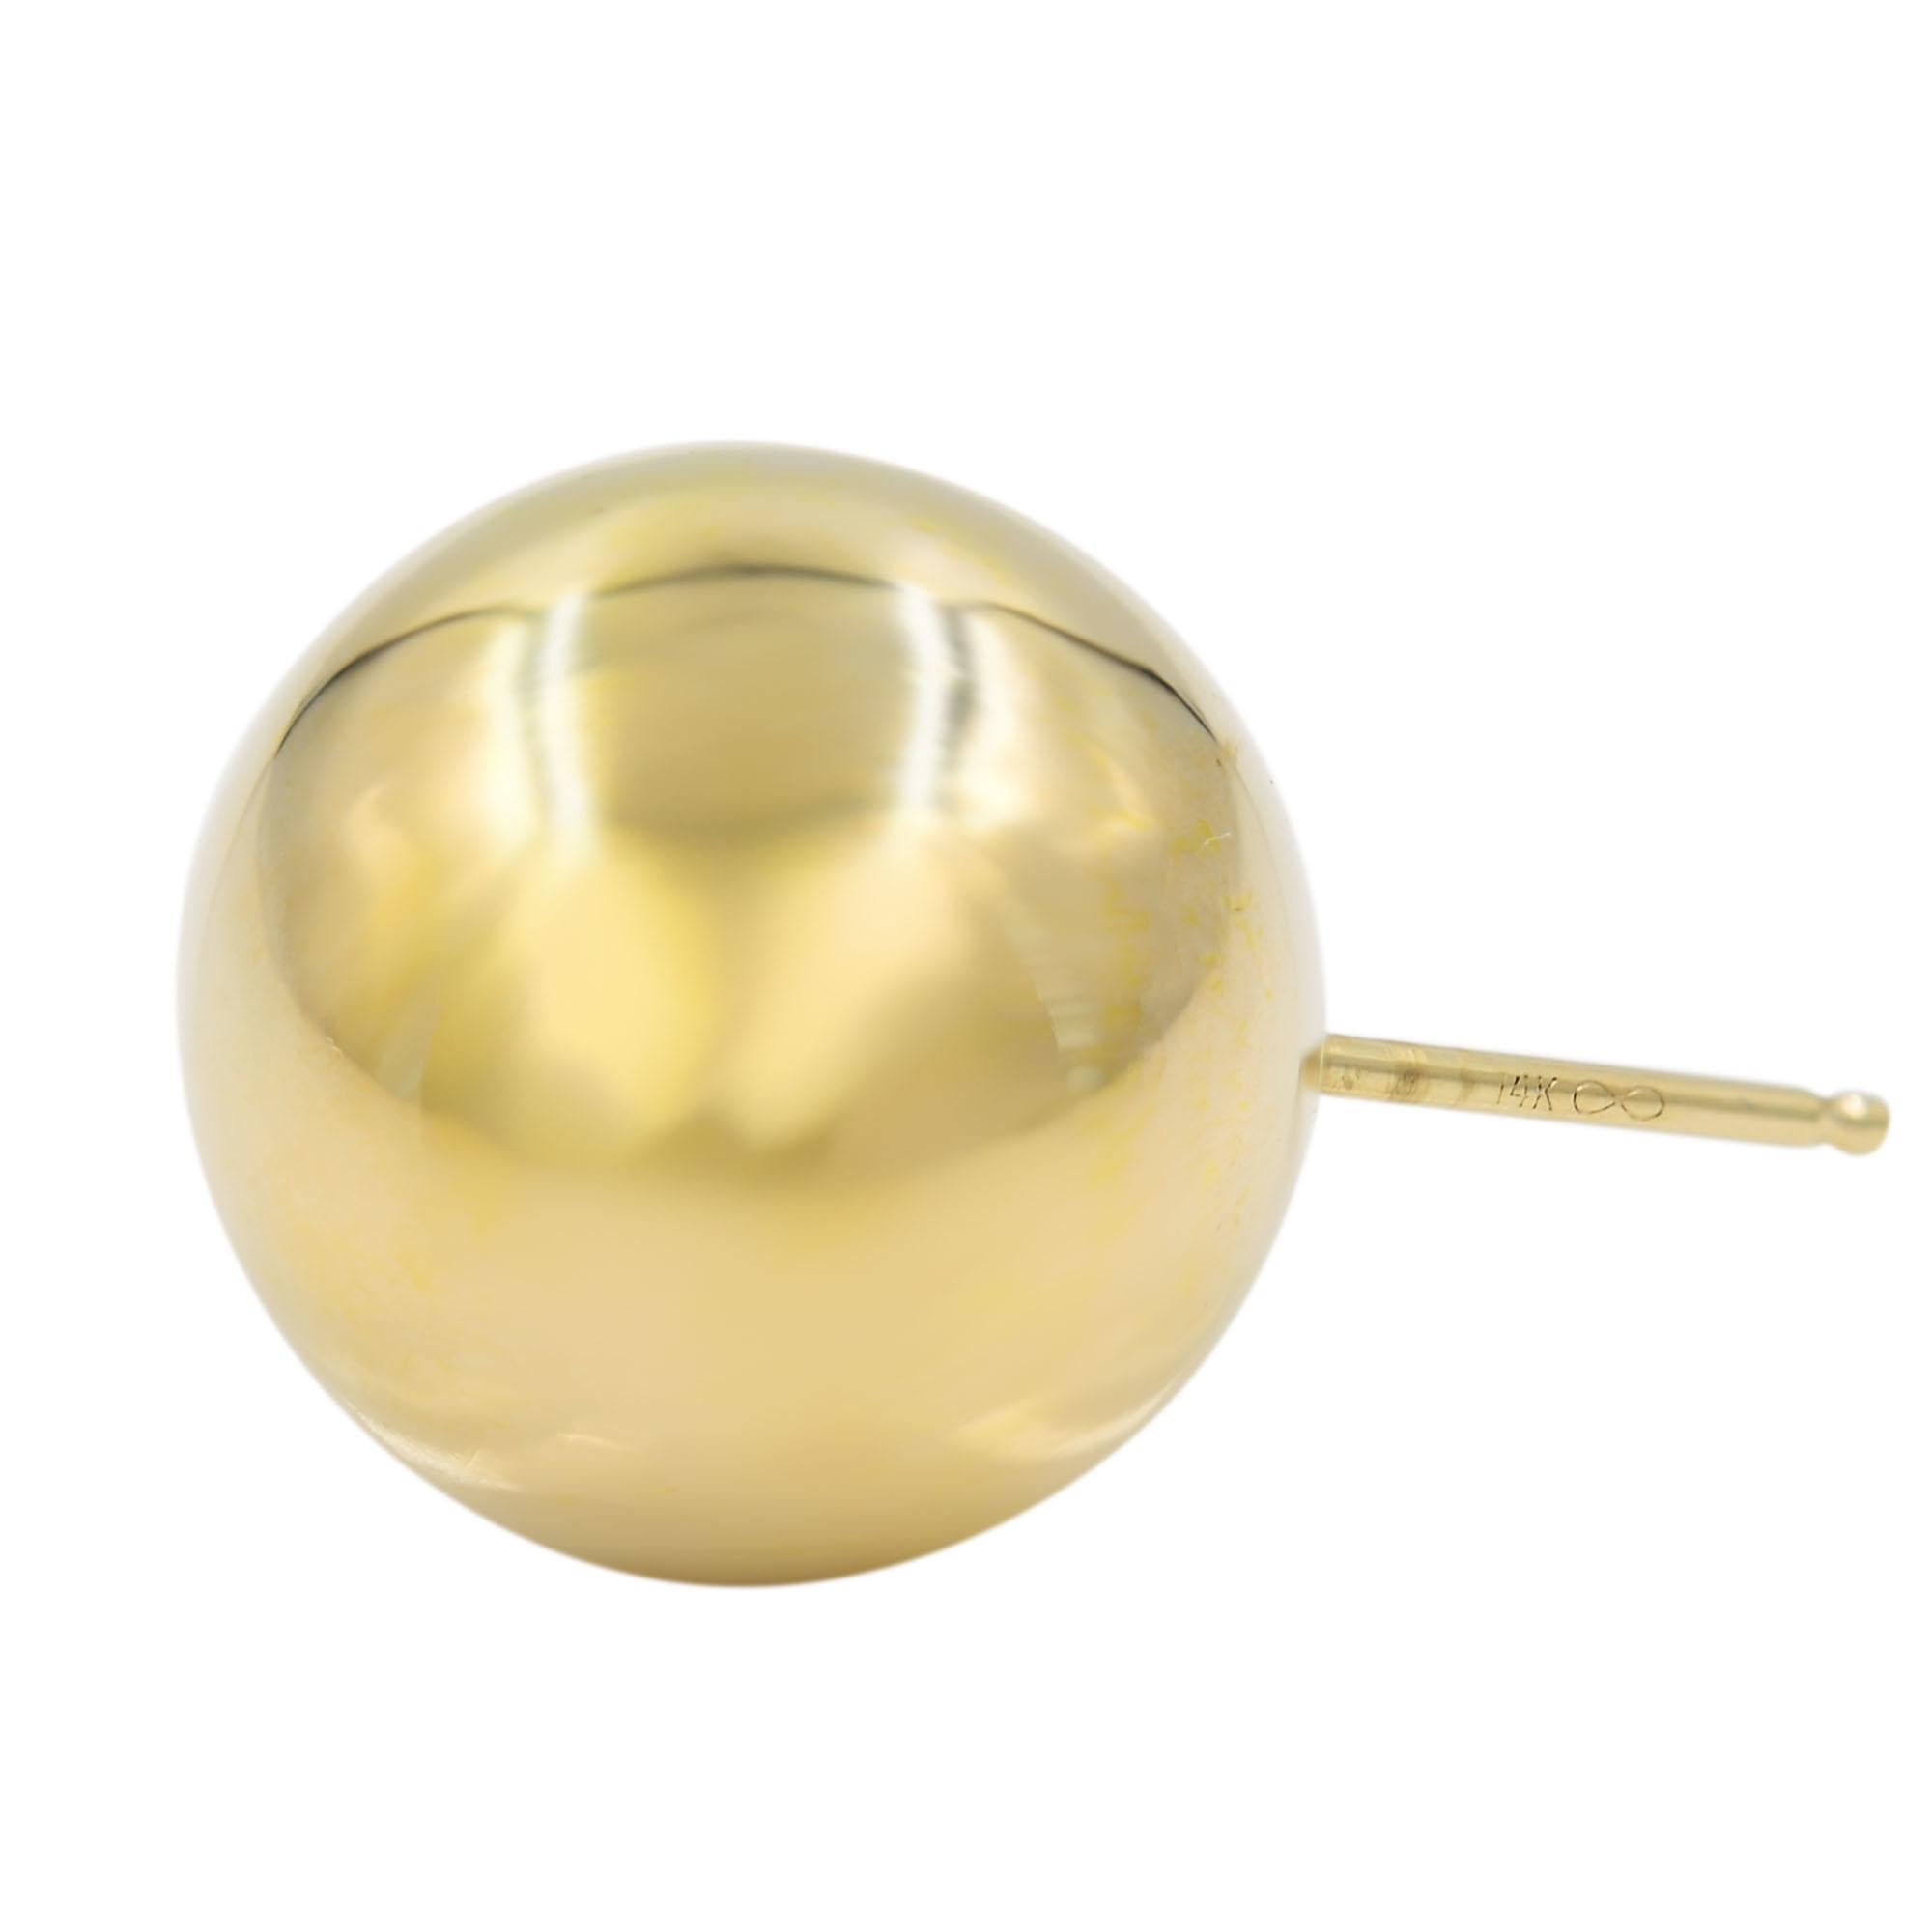 Ball stud earrings crafted in 14k yellow gold are perfect for everyday wear. Actual gold, lightweight and festive. Size: 6mm. Closure: push backings. Comes with a presentable gift box.